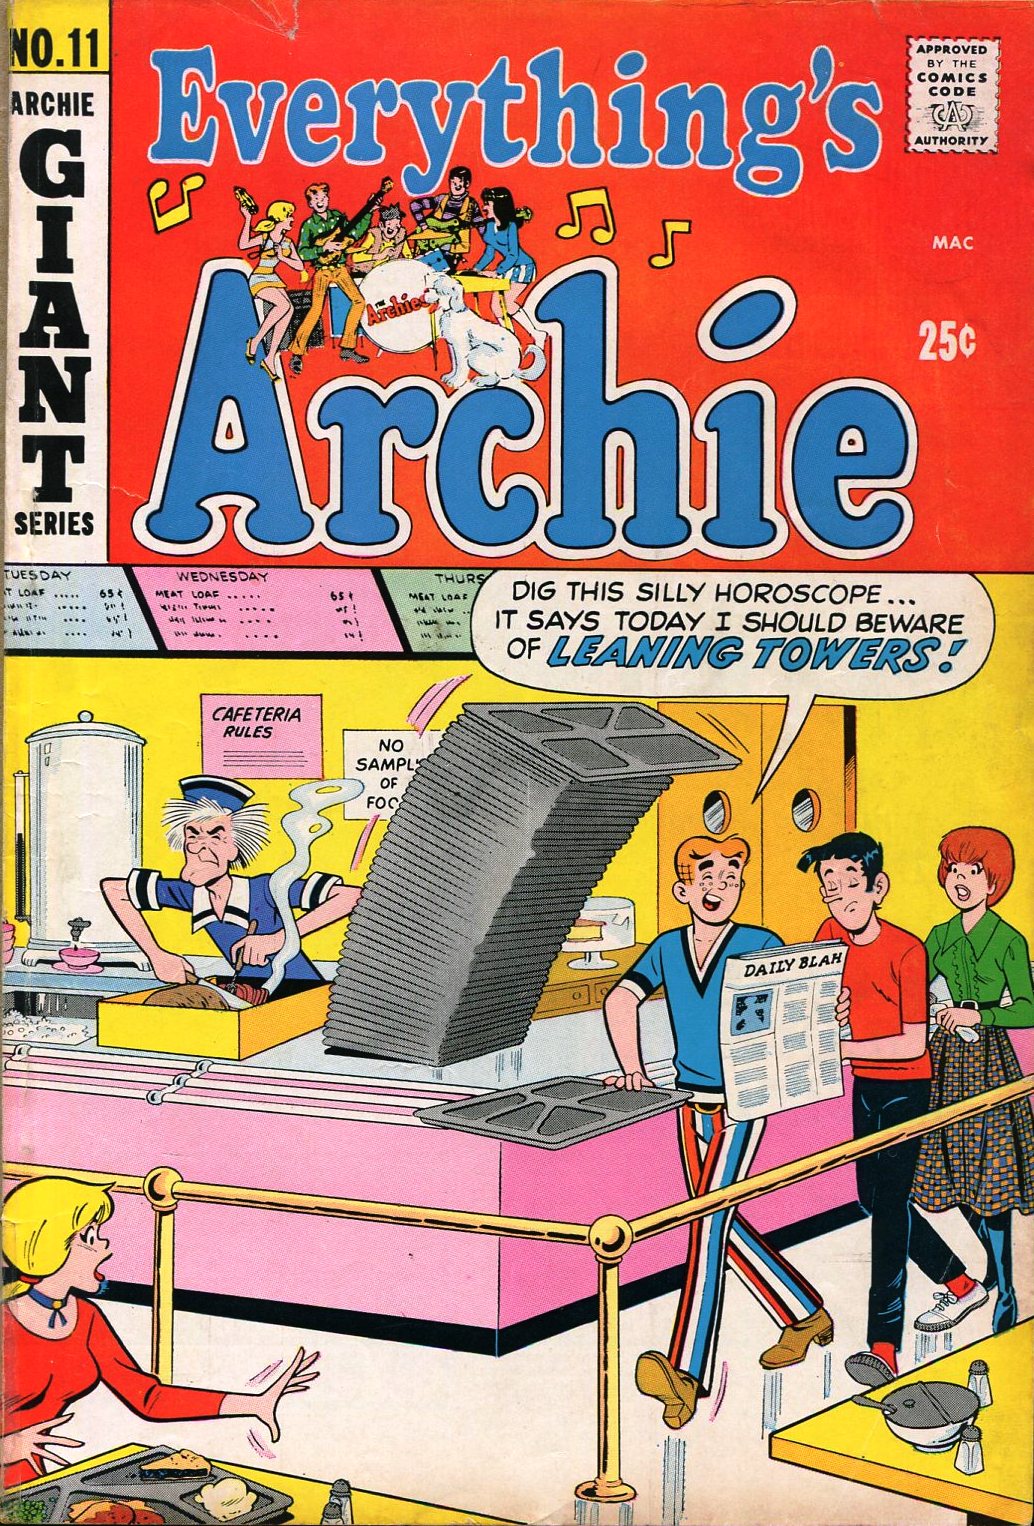 Read online Everything's Archie comic -  Issue #11 - 1